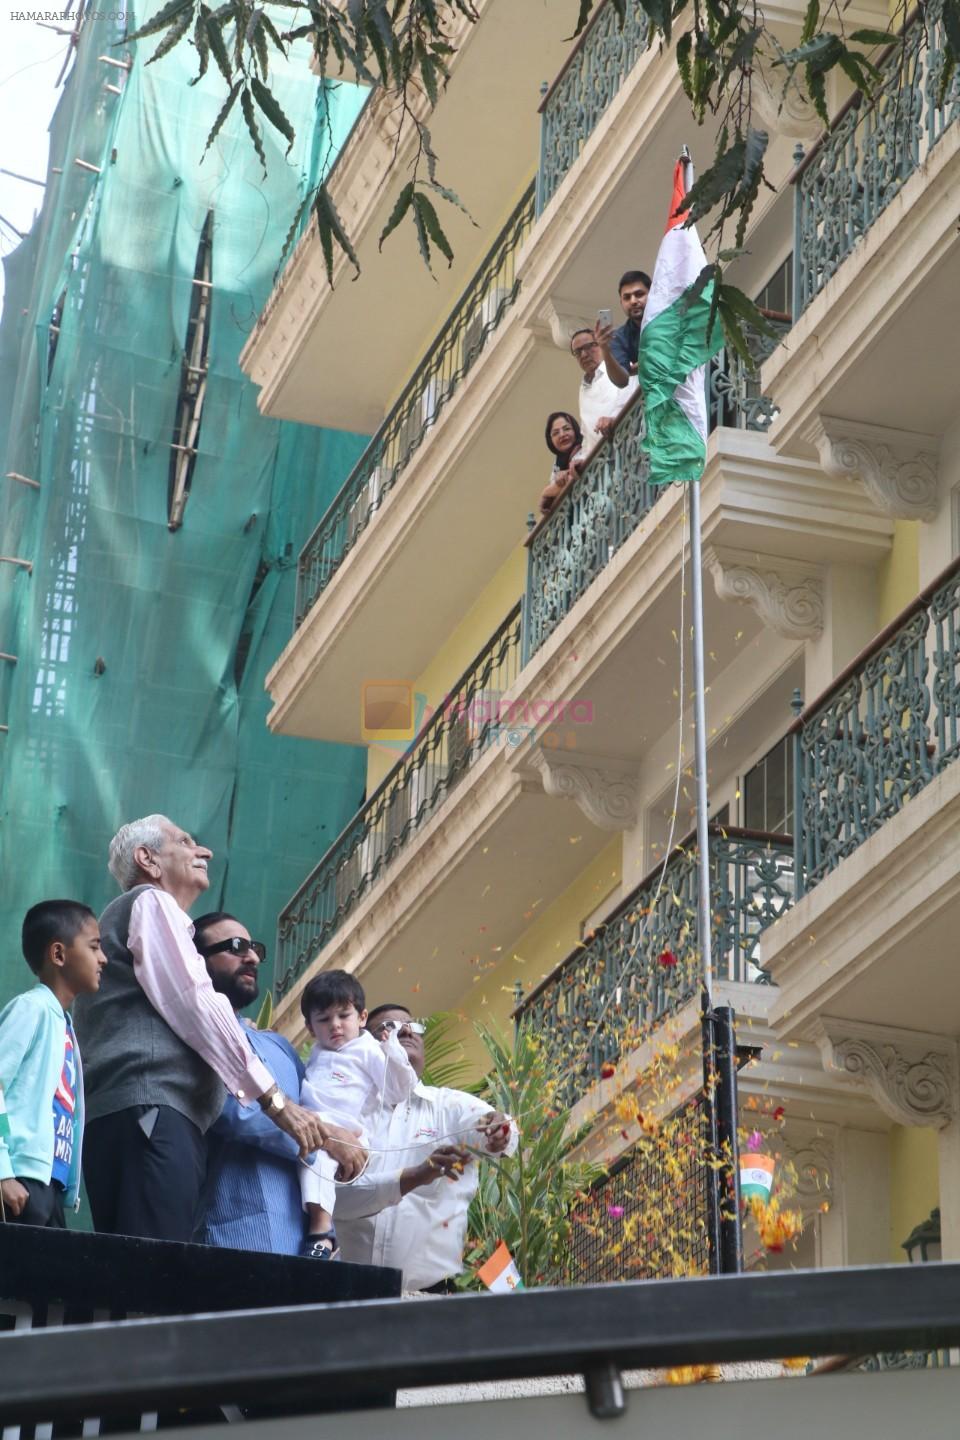 Saif Ali Khan & Taimur during the flag hoisting ceremony at thier society in bandra on 26th Jan 2019